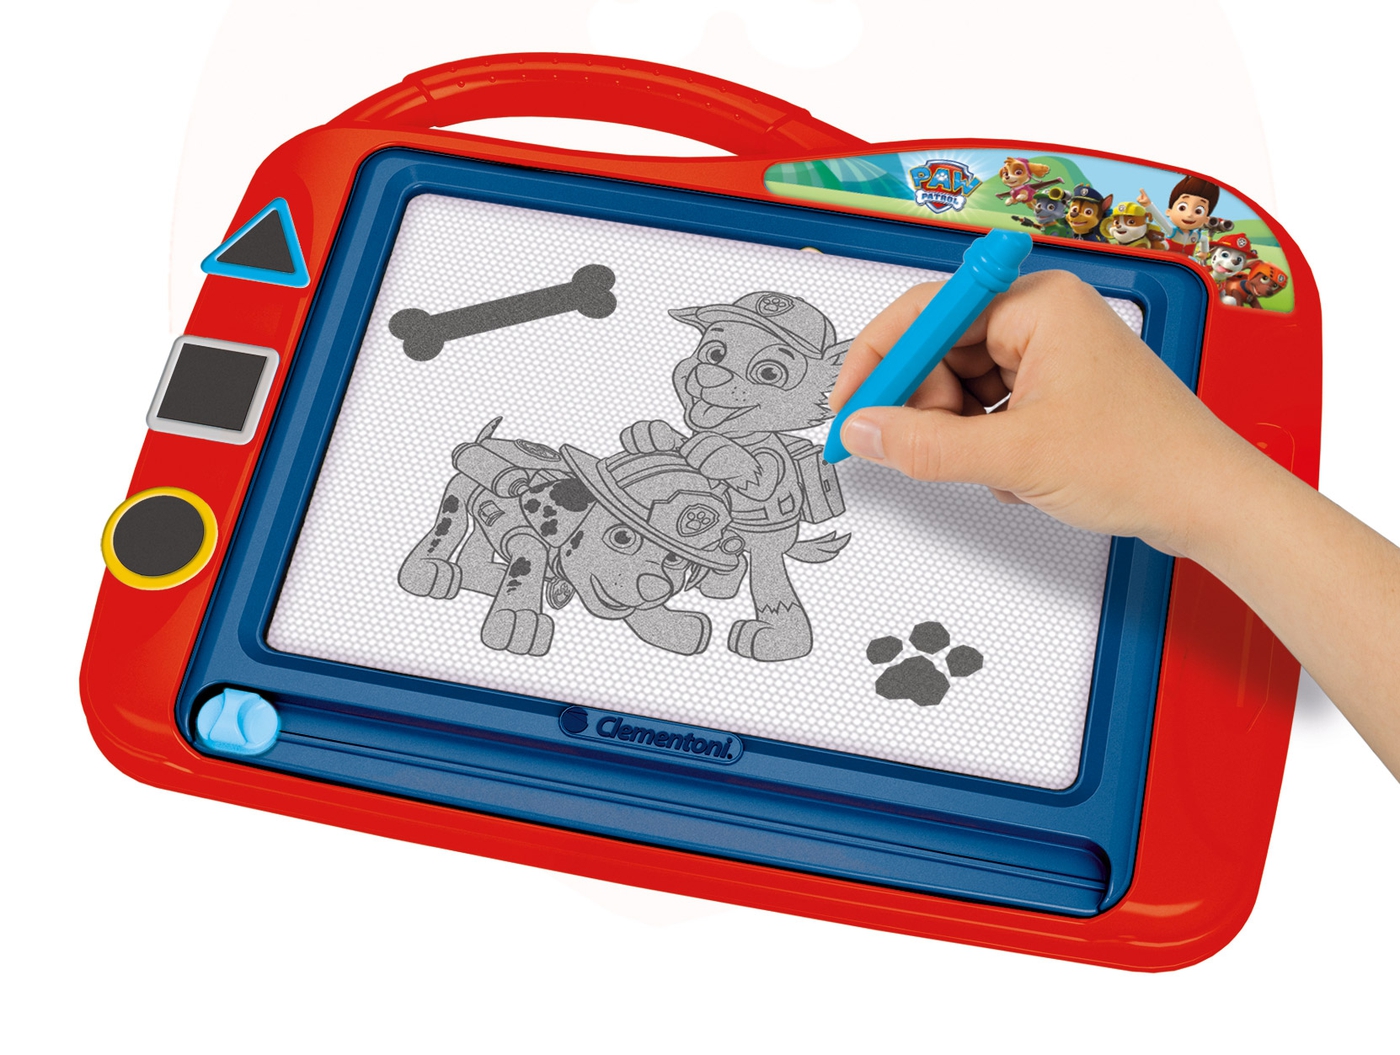 Baltimore Mall Magnetic Drawing Board gumex.hu